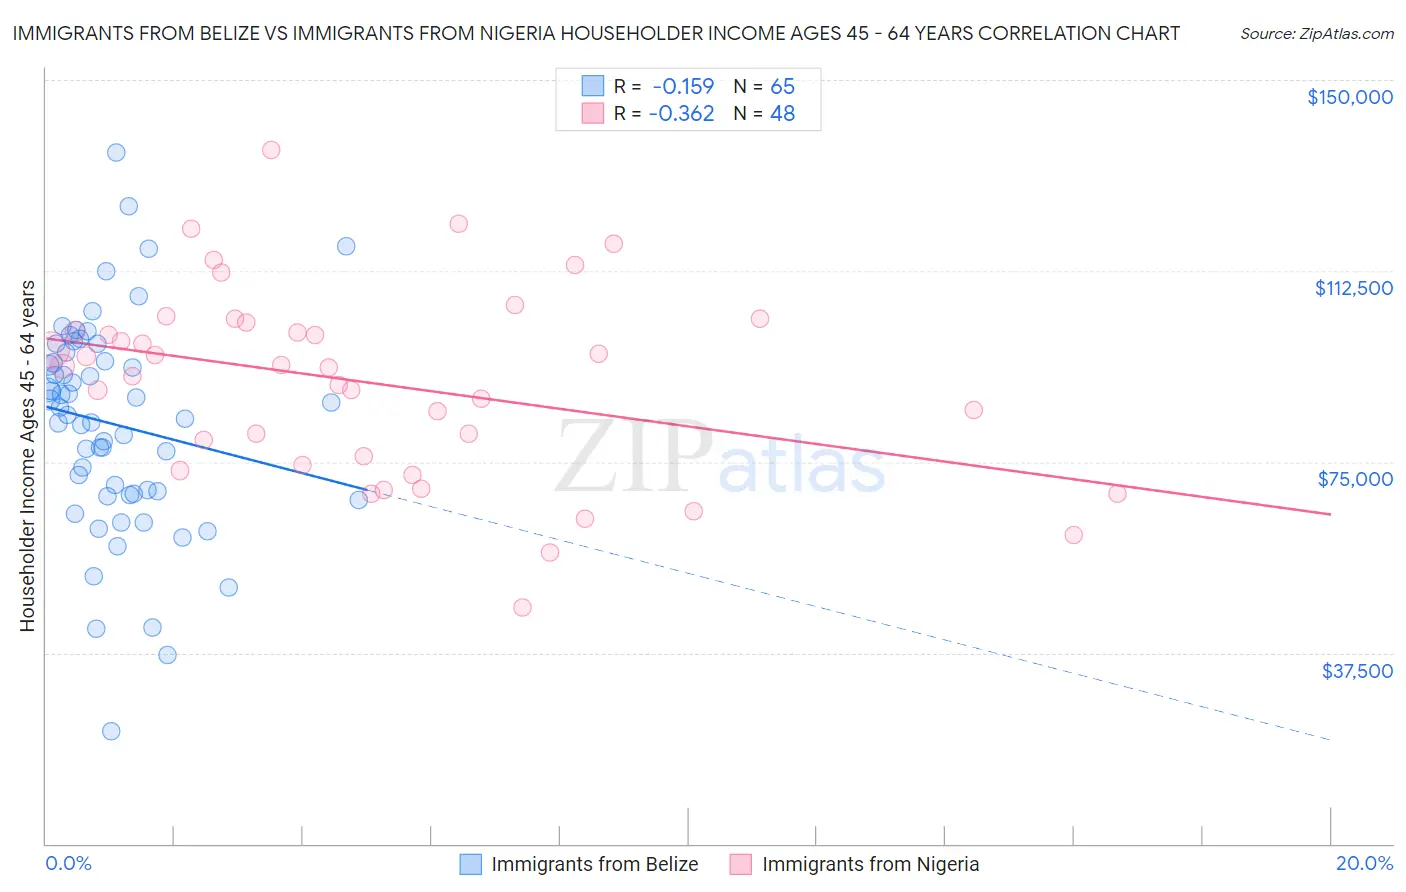 Immigrants from Belize vs Immigrants from Nigeria Householder Income Ages 45 - 64 years